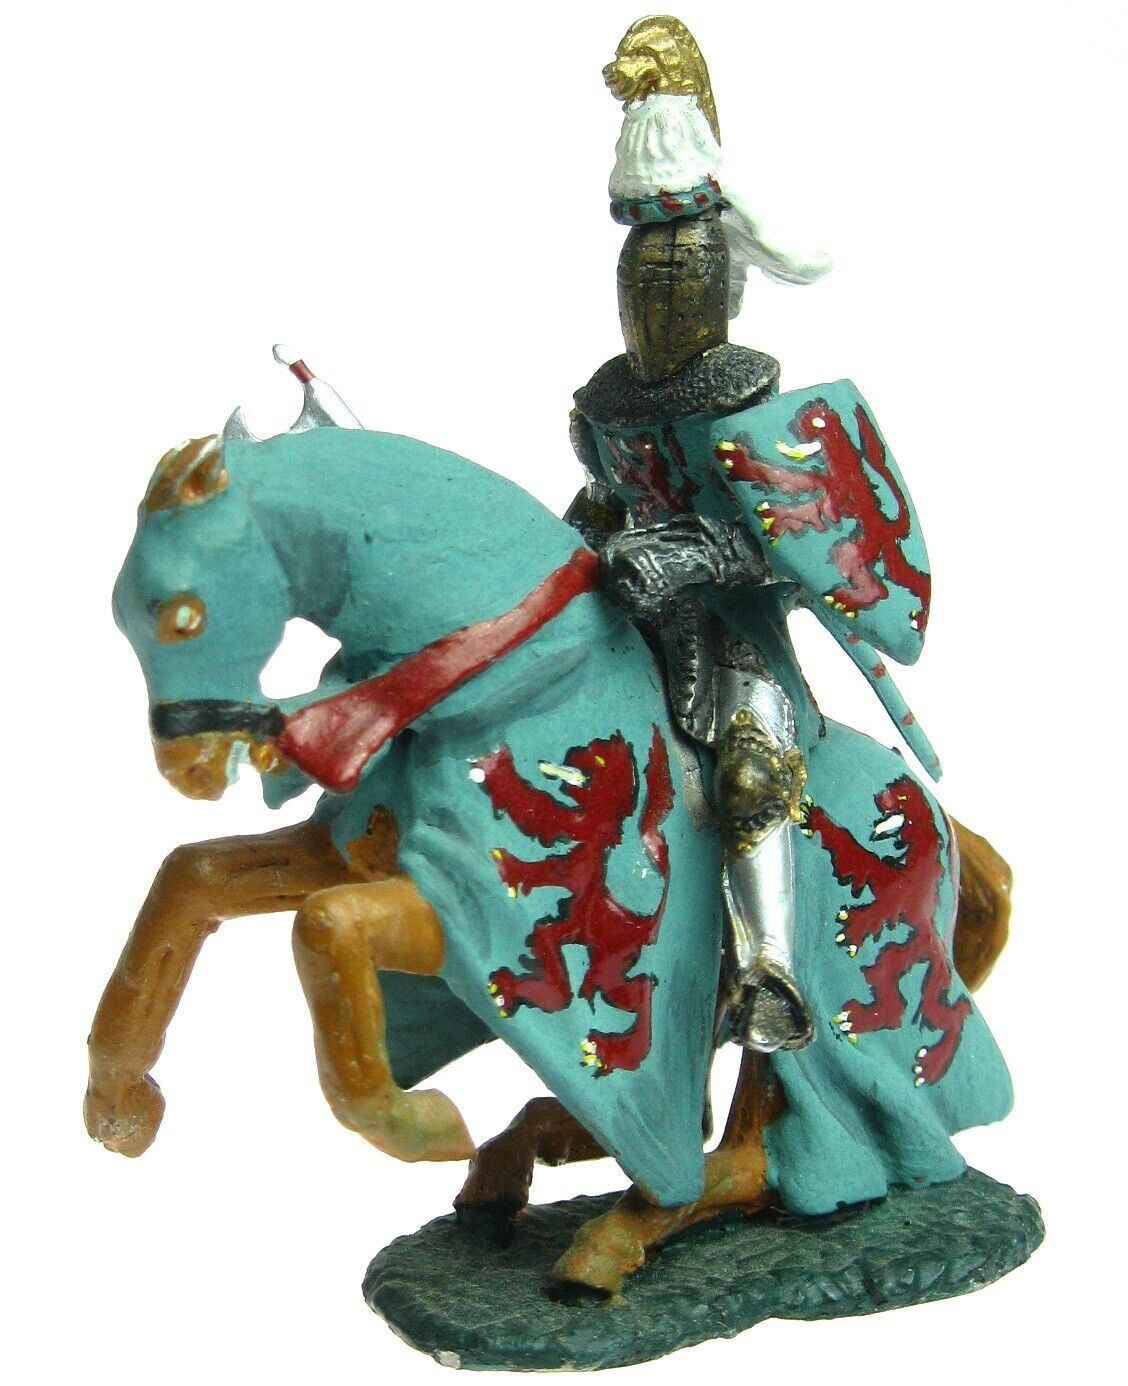 Mounted Medieval Knight Herald Jousting/Battle 54mm  Toy Soldier - $34.99